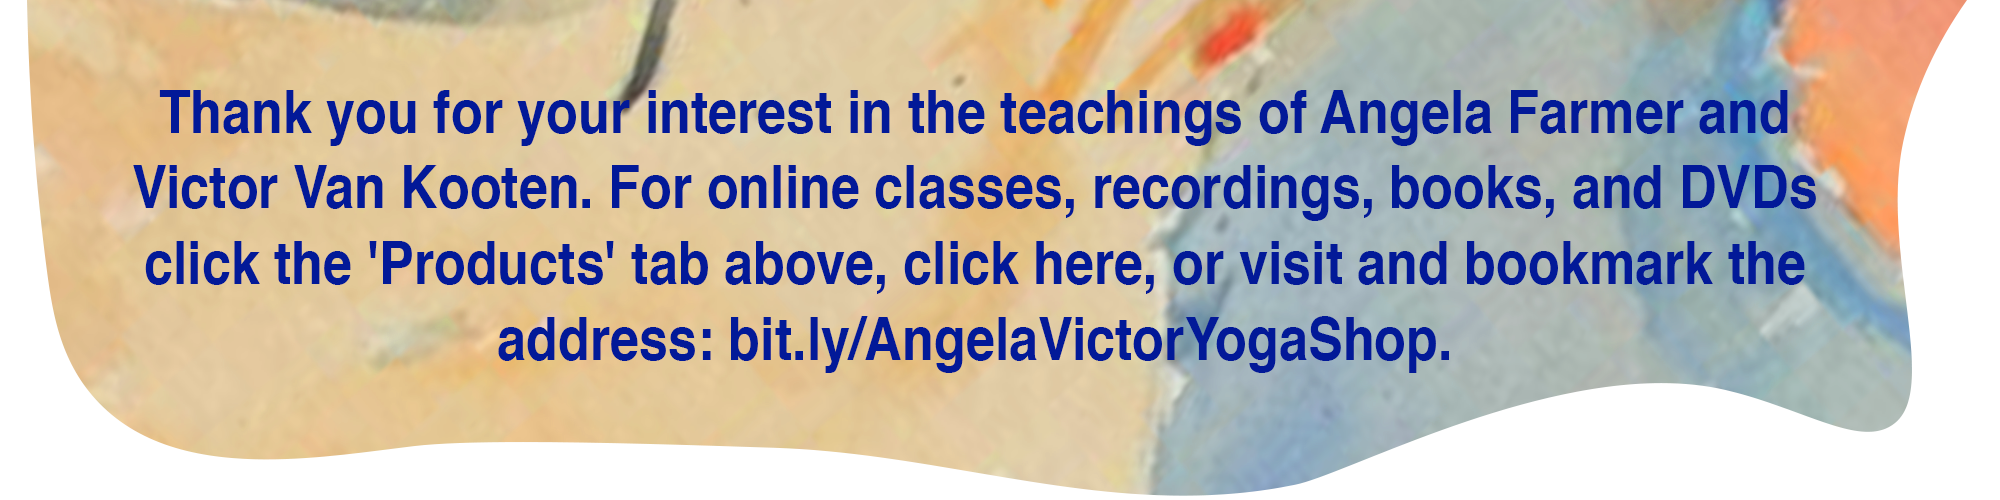 Thank you for your interest in the teachings of Angela Farmer and Victor Van Kooten. For online classes, recordings, books, and DVDs click the 'Products' tab above or visit bit.ly/AngelaVictorYogaShop